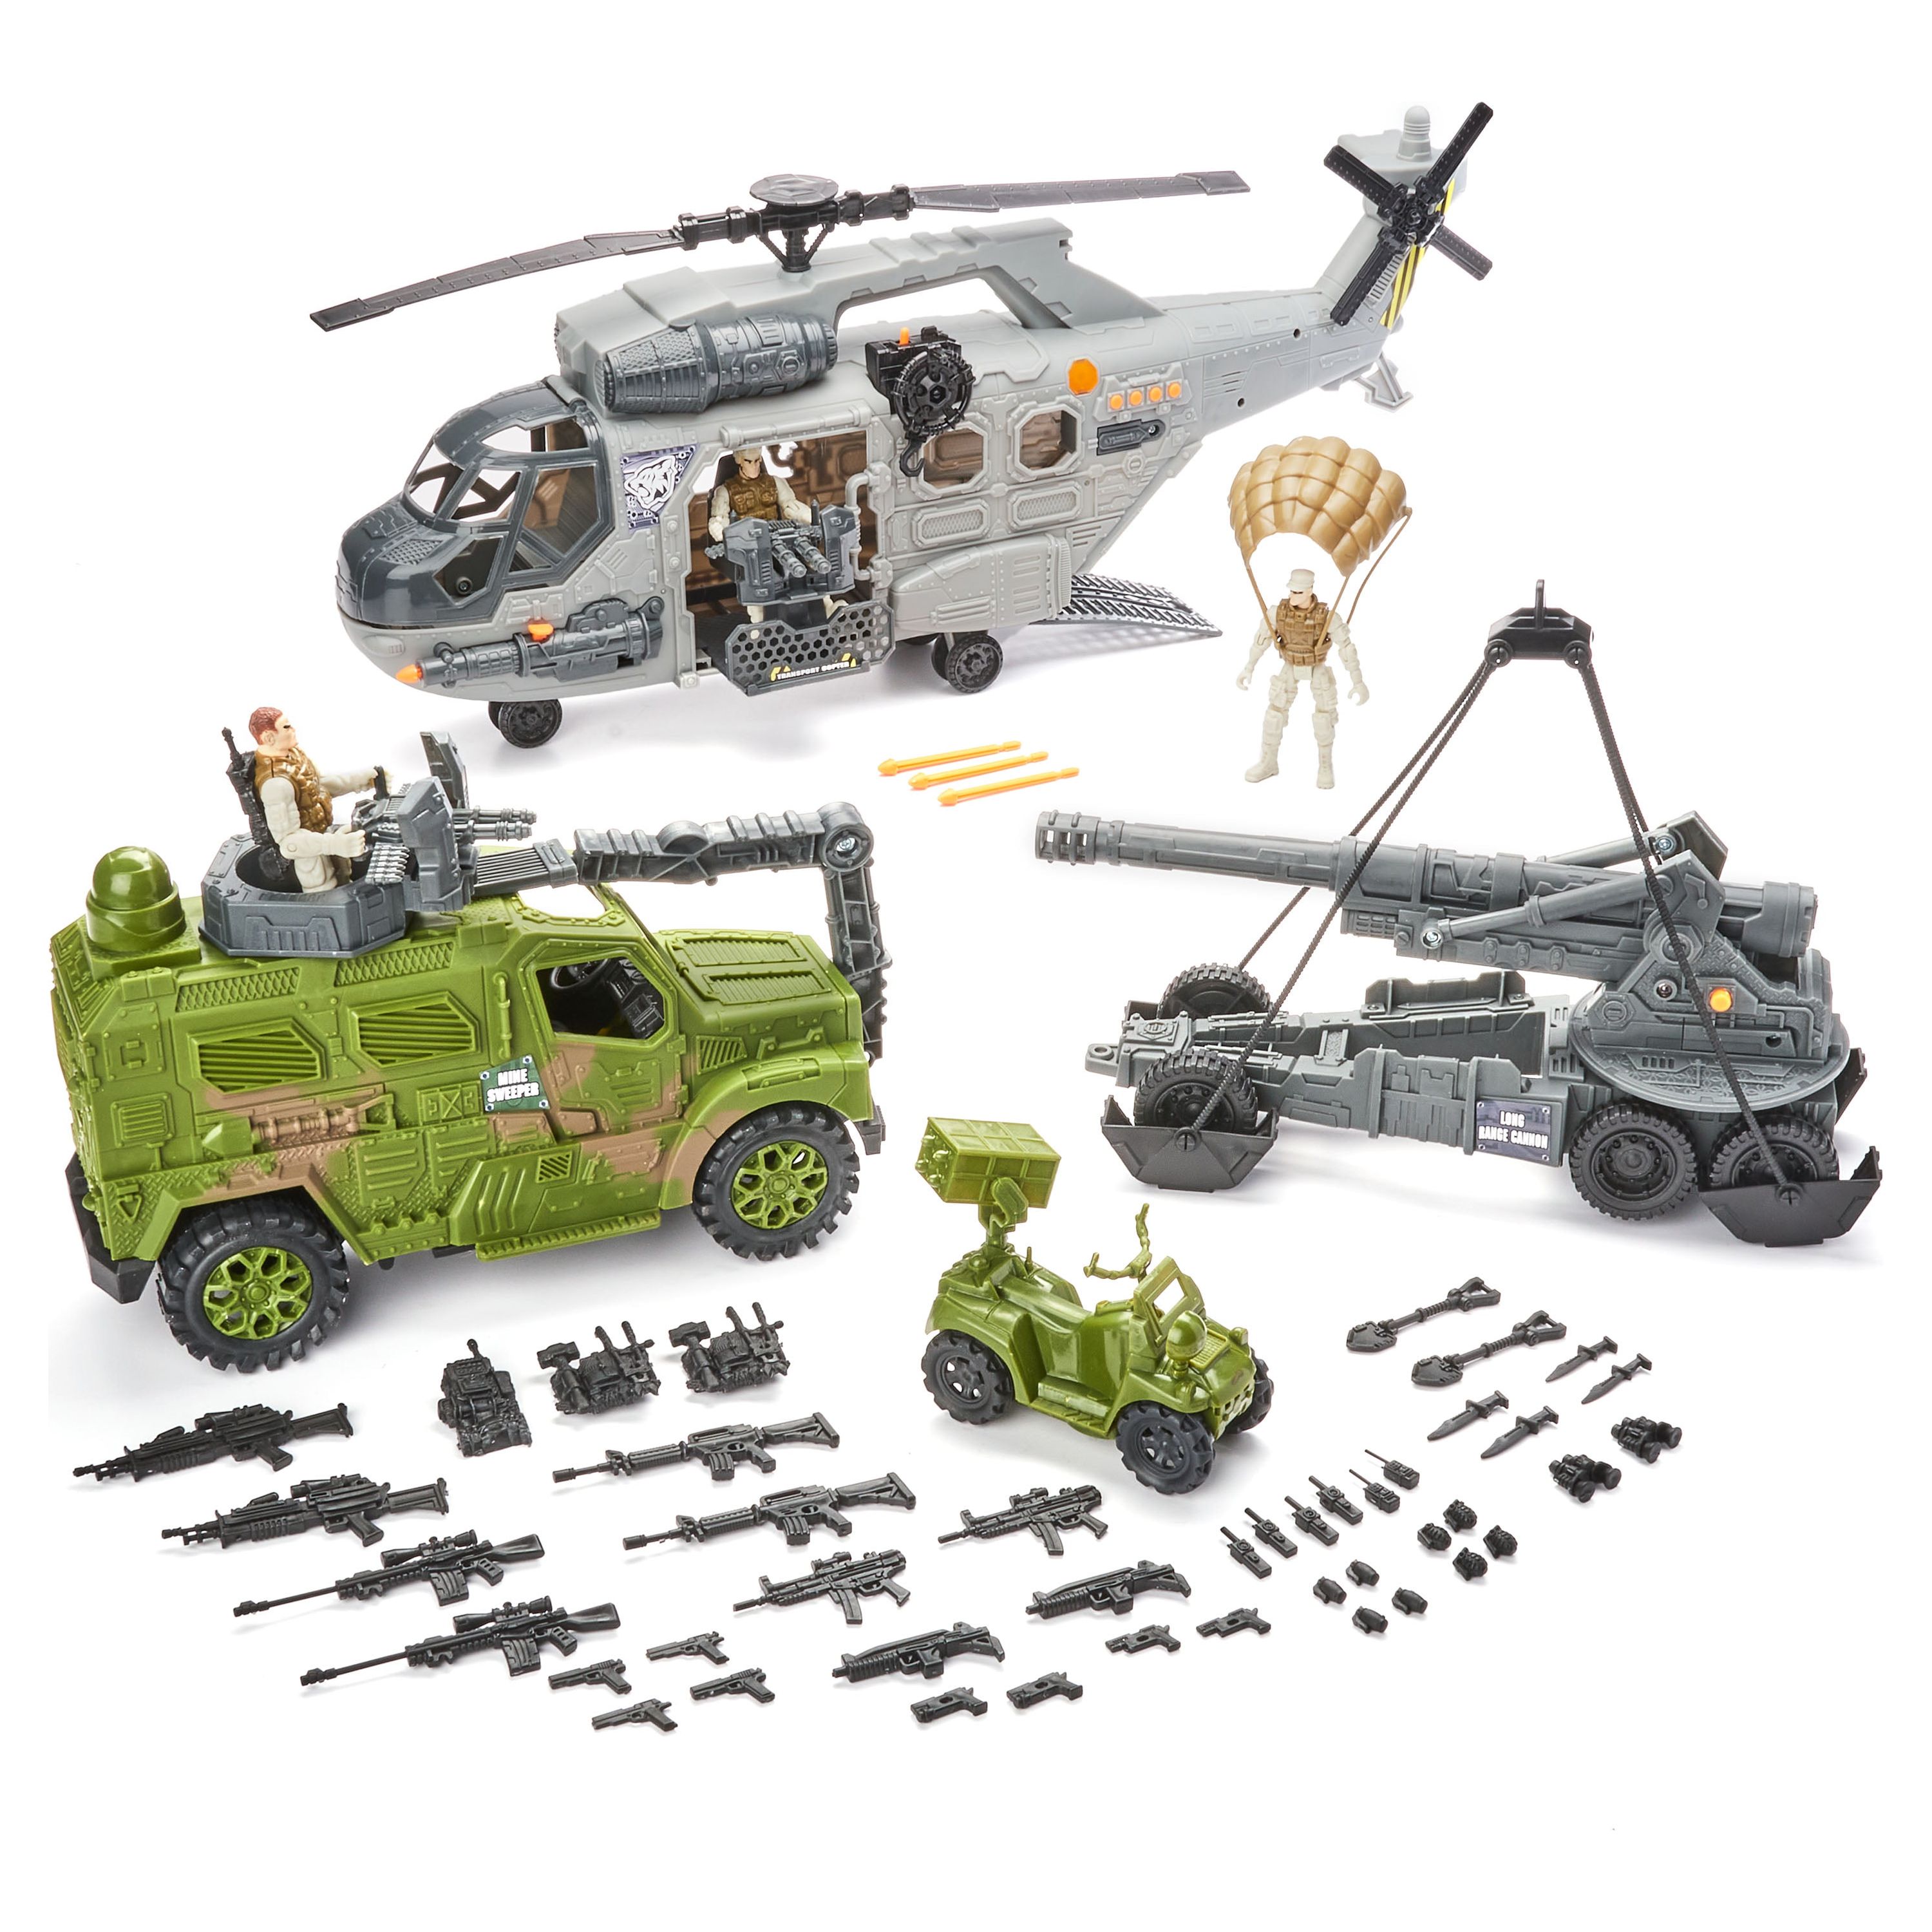 Kid Connection Military Giant Copter Play Set, 57 Pieces - image 1 of 5